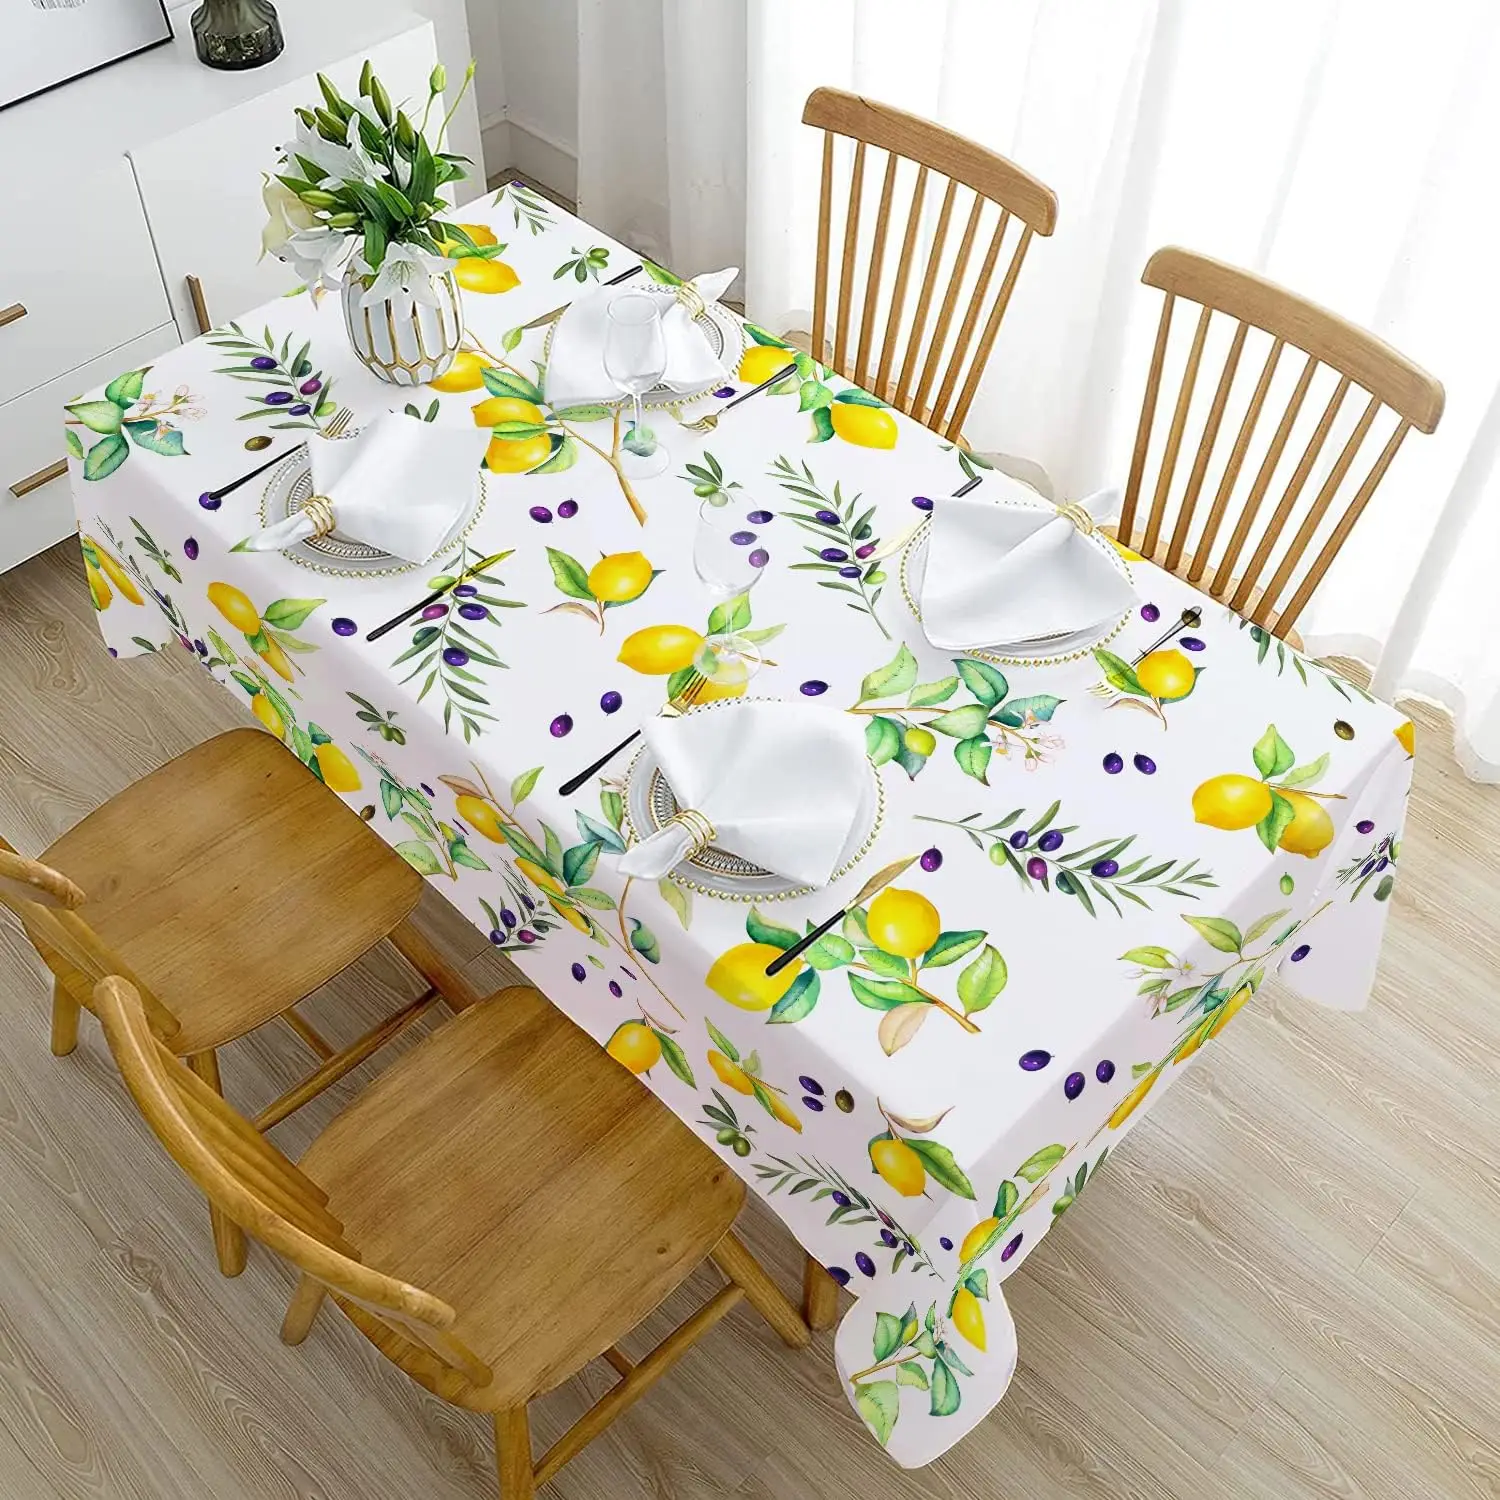 

Summer Watercolor Lemon Rectangle Tablecloth Kitchen Dining Decor Reusable Waterproof Tablecloth Holiday Party Decorations